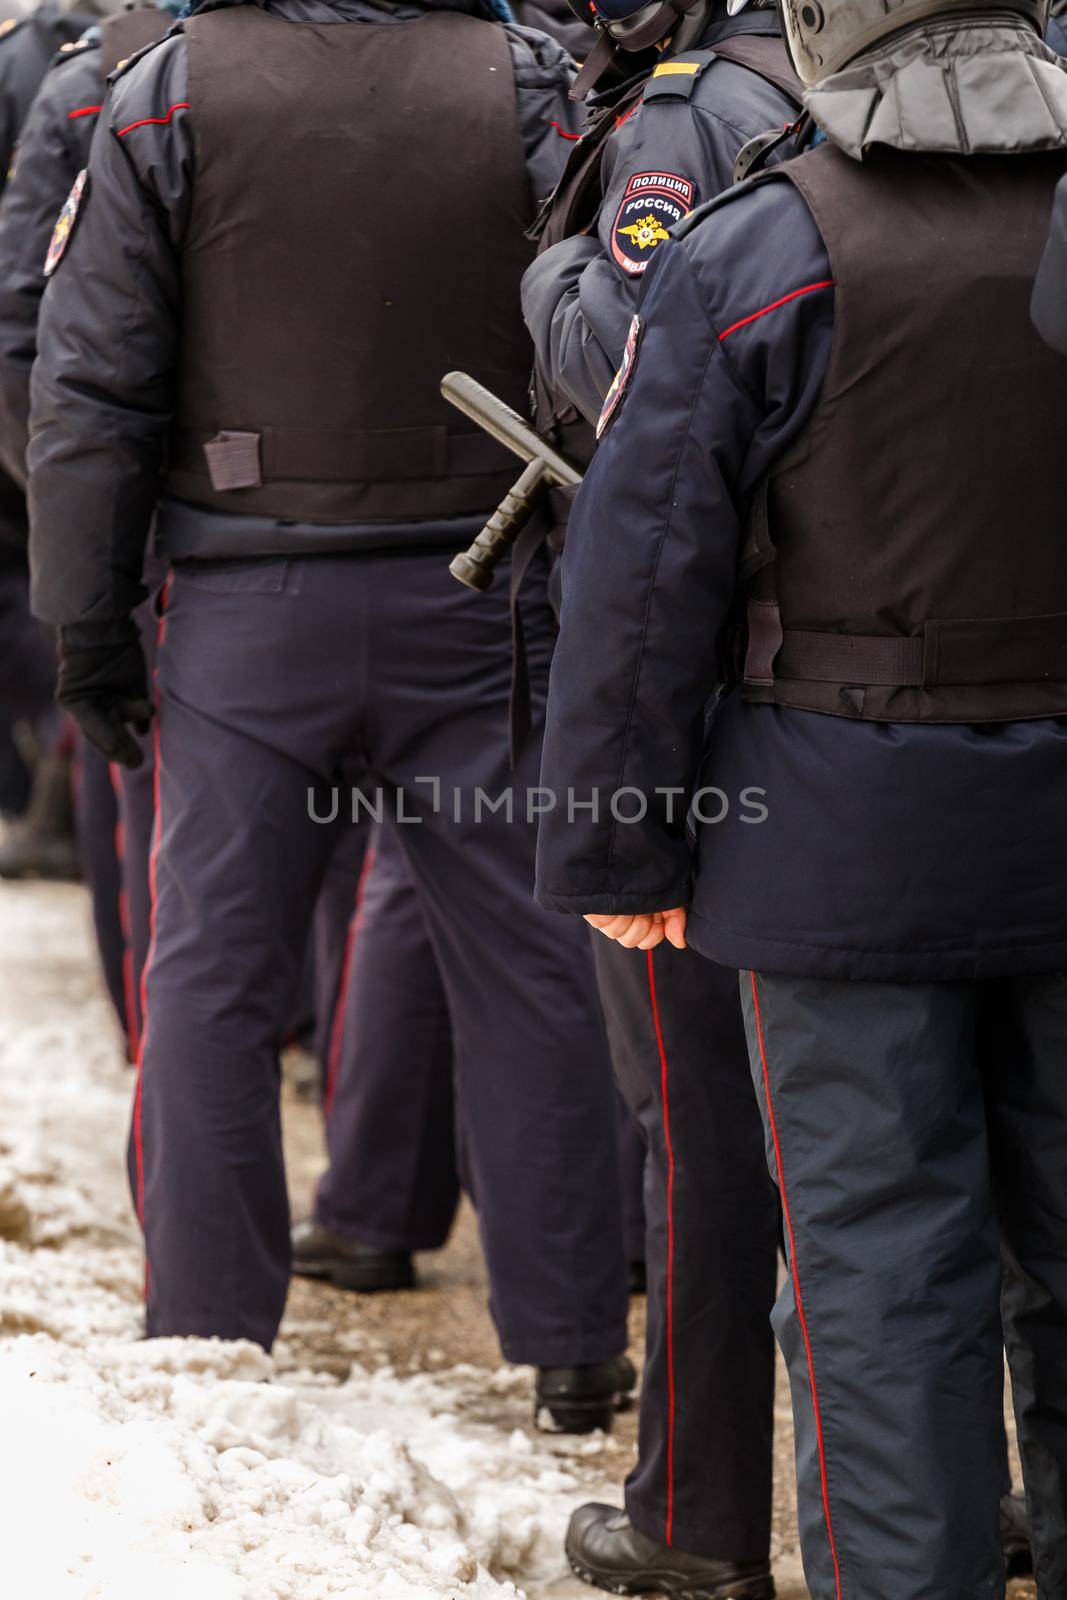 TULA, RUSSIA - JANUARY 23, 2021: Crowd of police officers in black uniform with bulletproof vests and pistols - view from back. by z1b